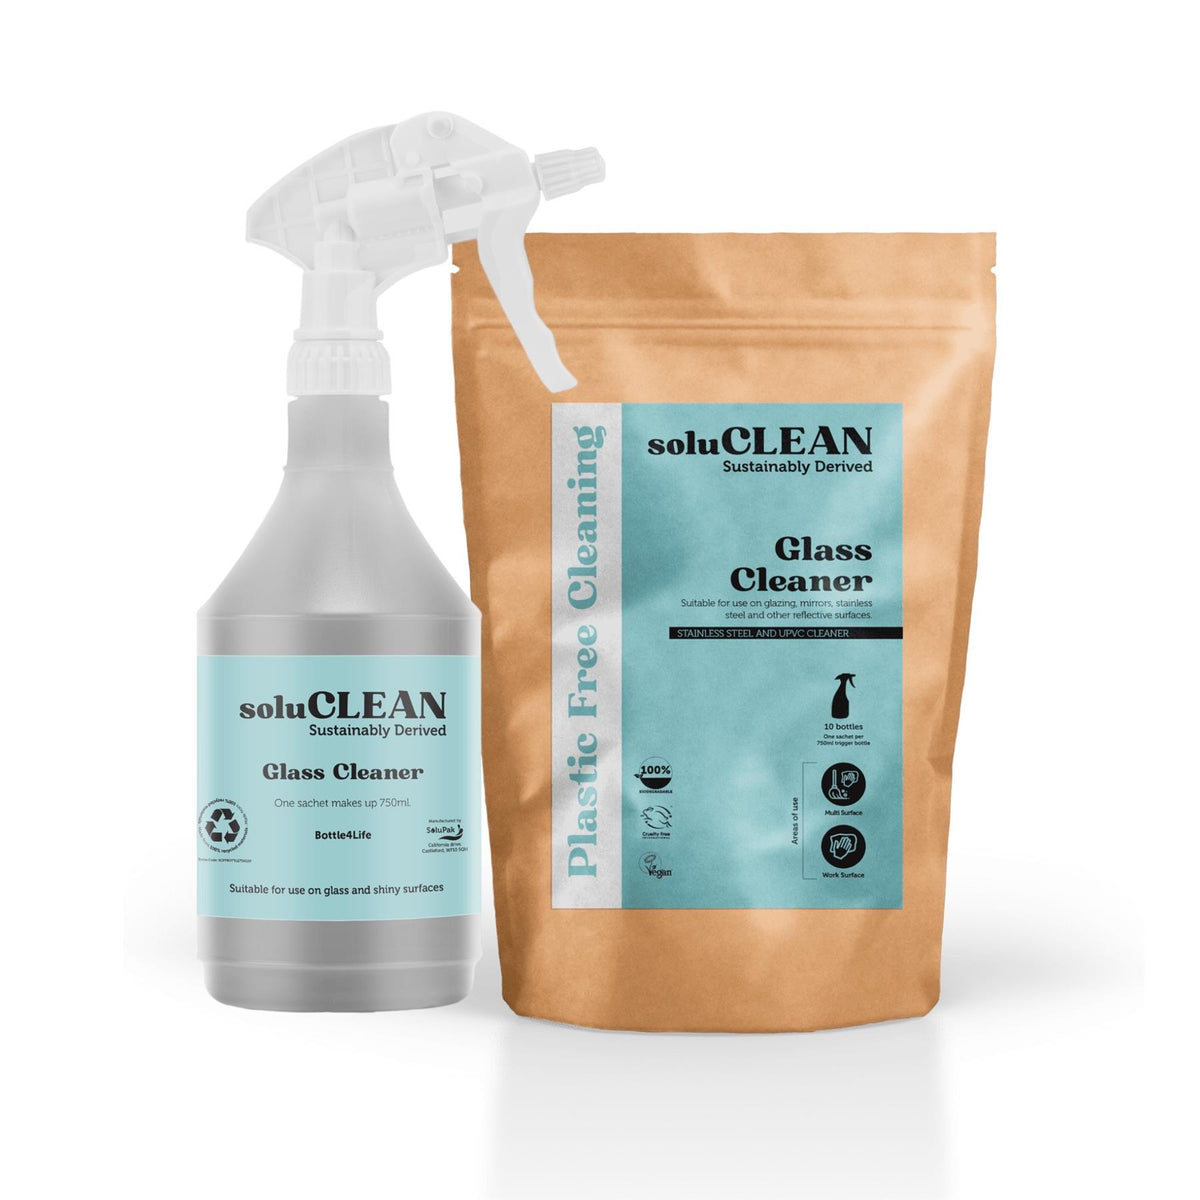 Soluclean, Starter Kit, Glass Cleaner, 750ml Reusable Trigger Spray Bottle and One Packet of 10 Sachets, Plastic Free Cleaning